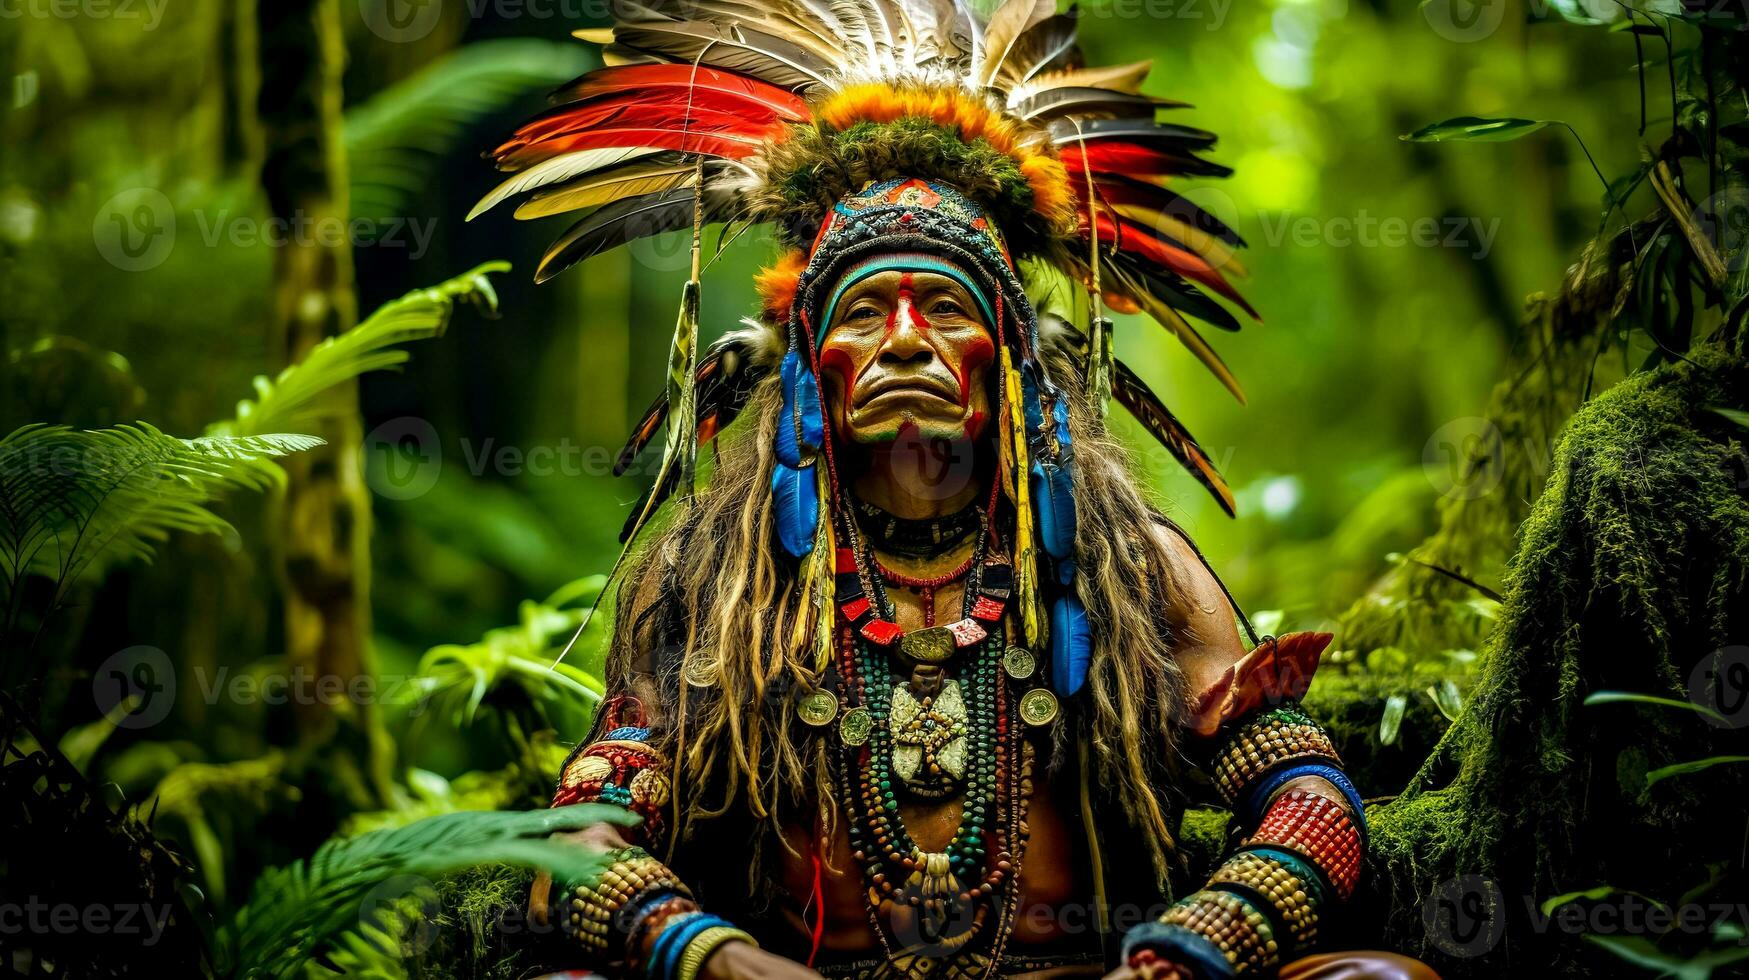 Native American leader in costume in the forest photo